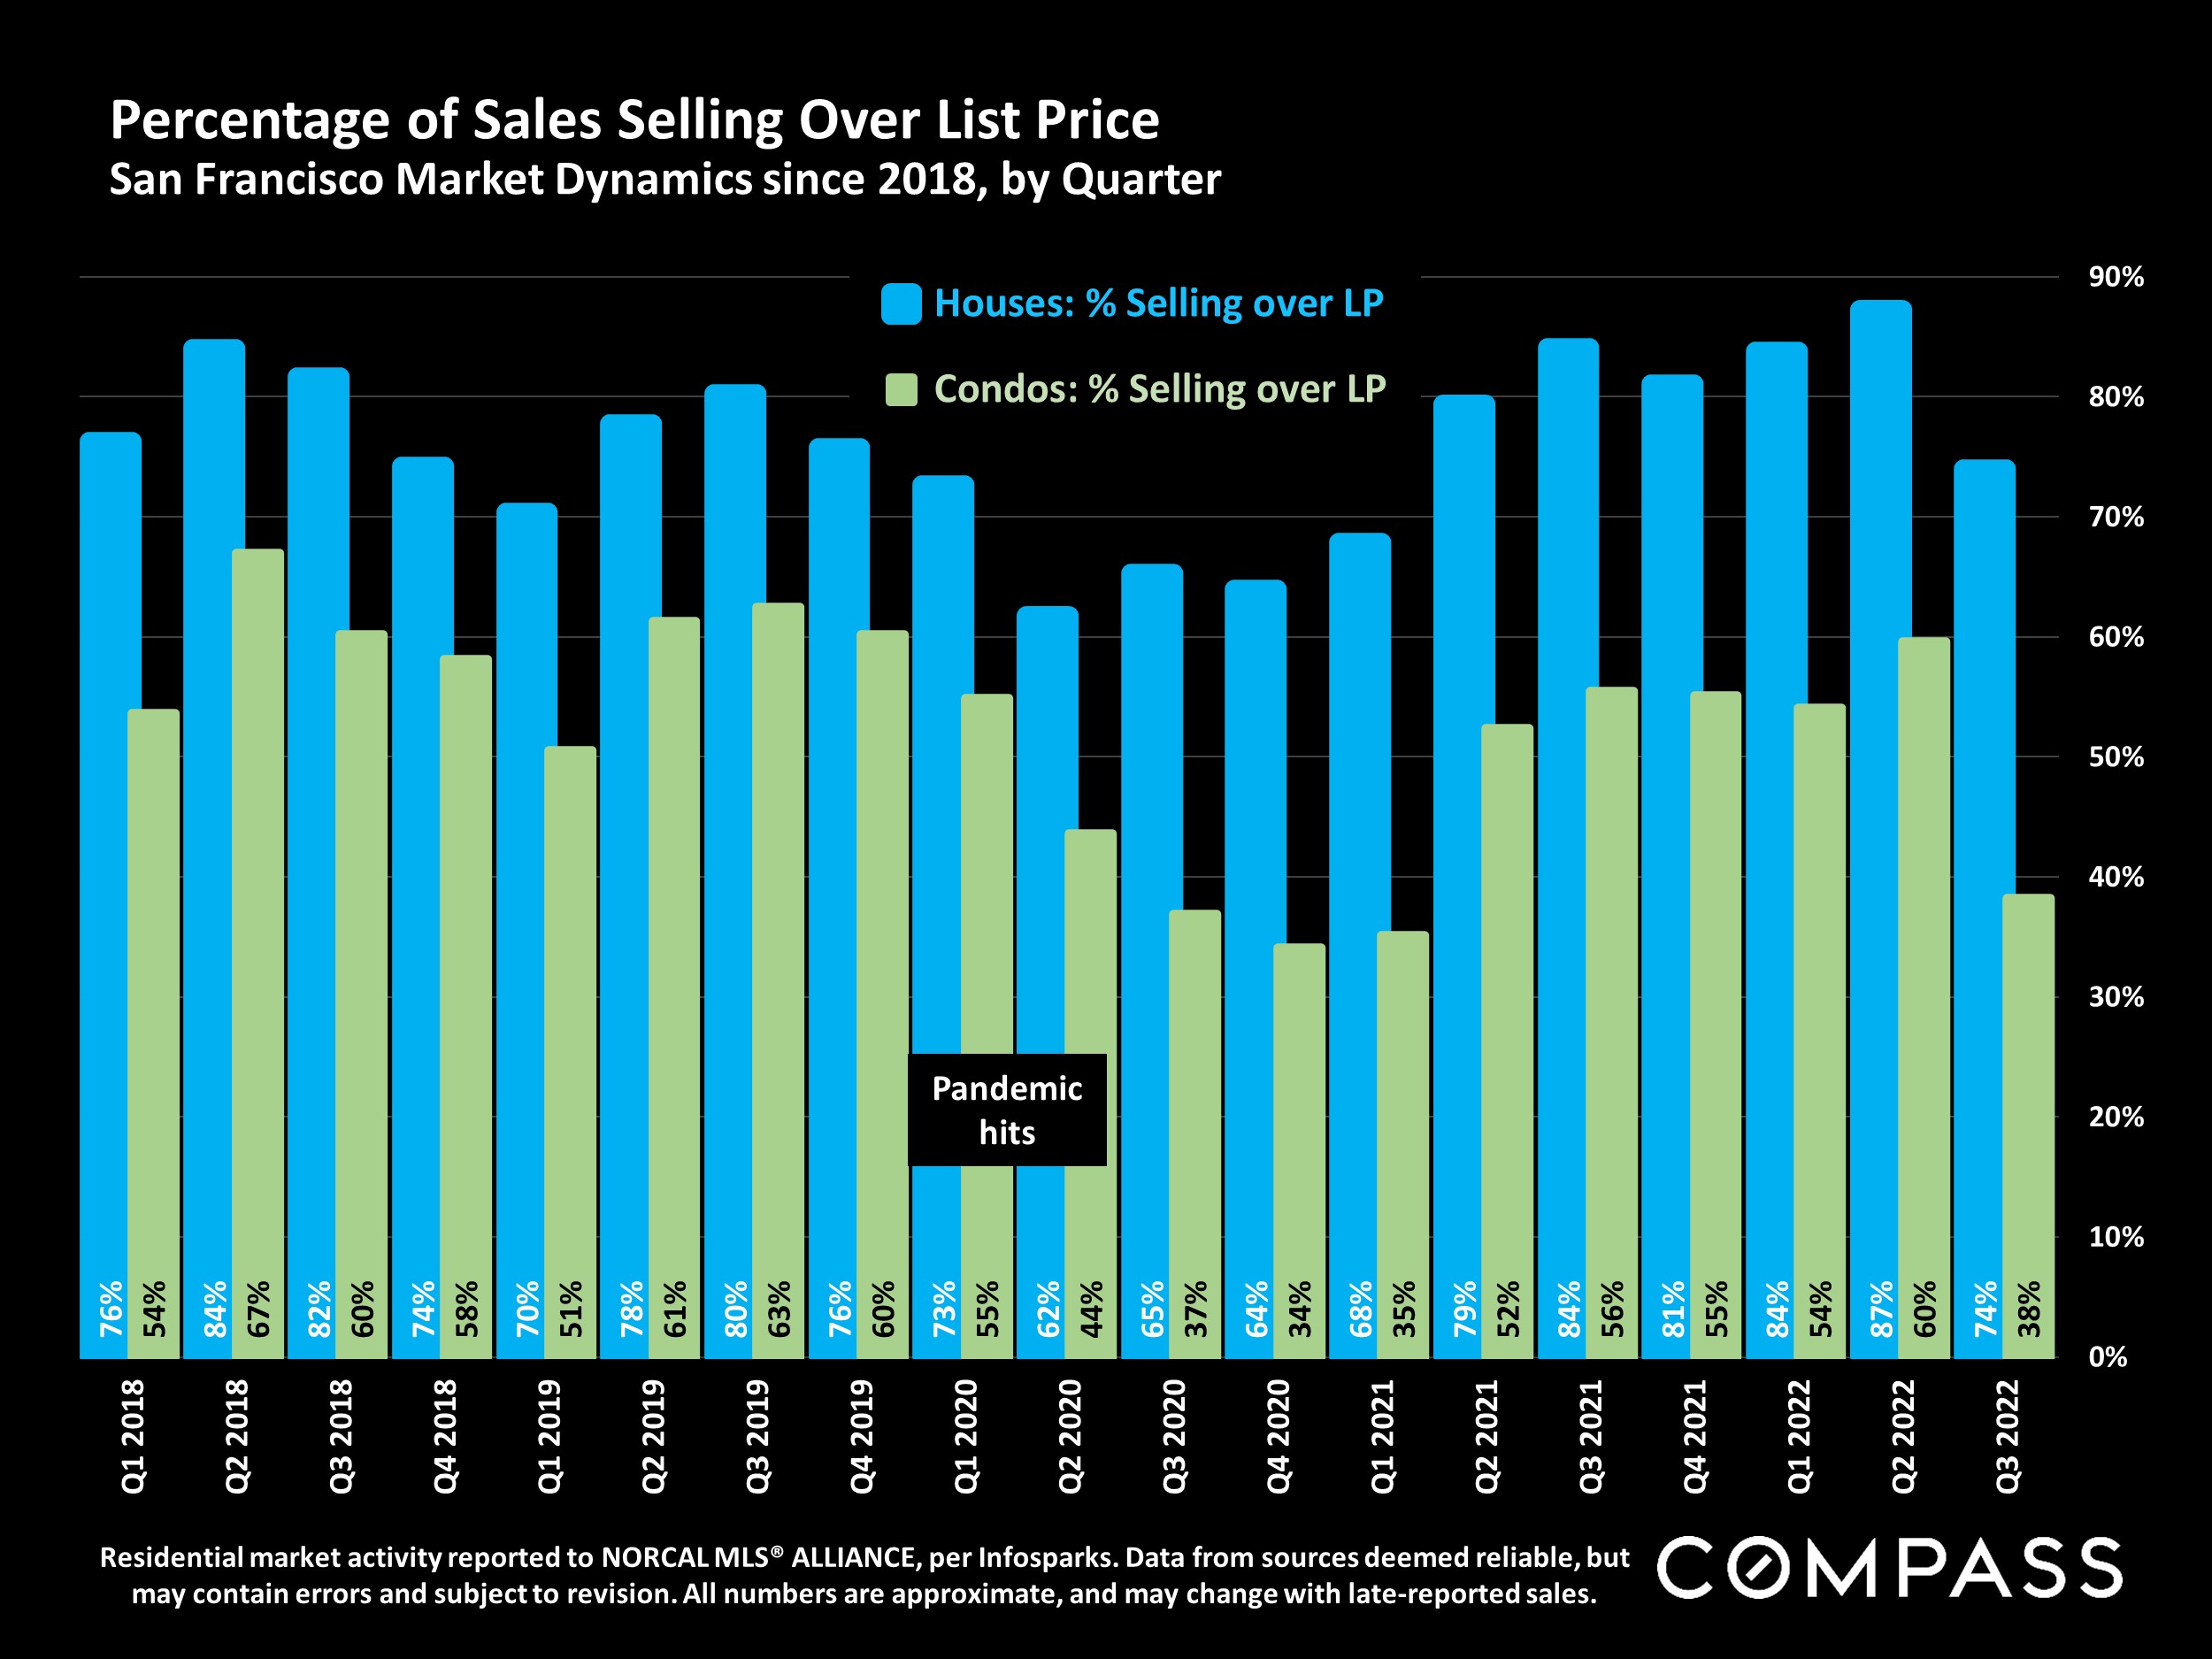 Percentage of Sales Selling Over List Price